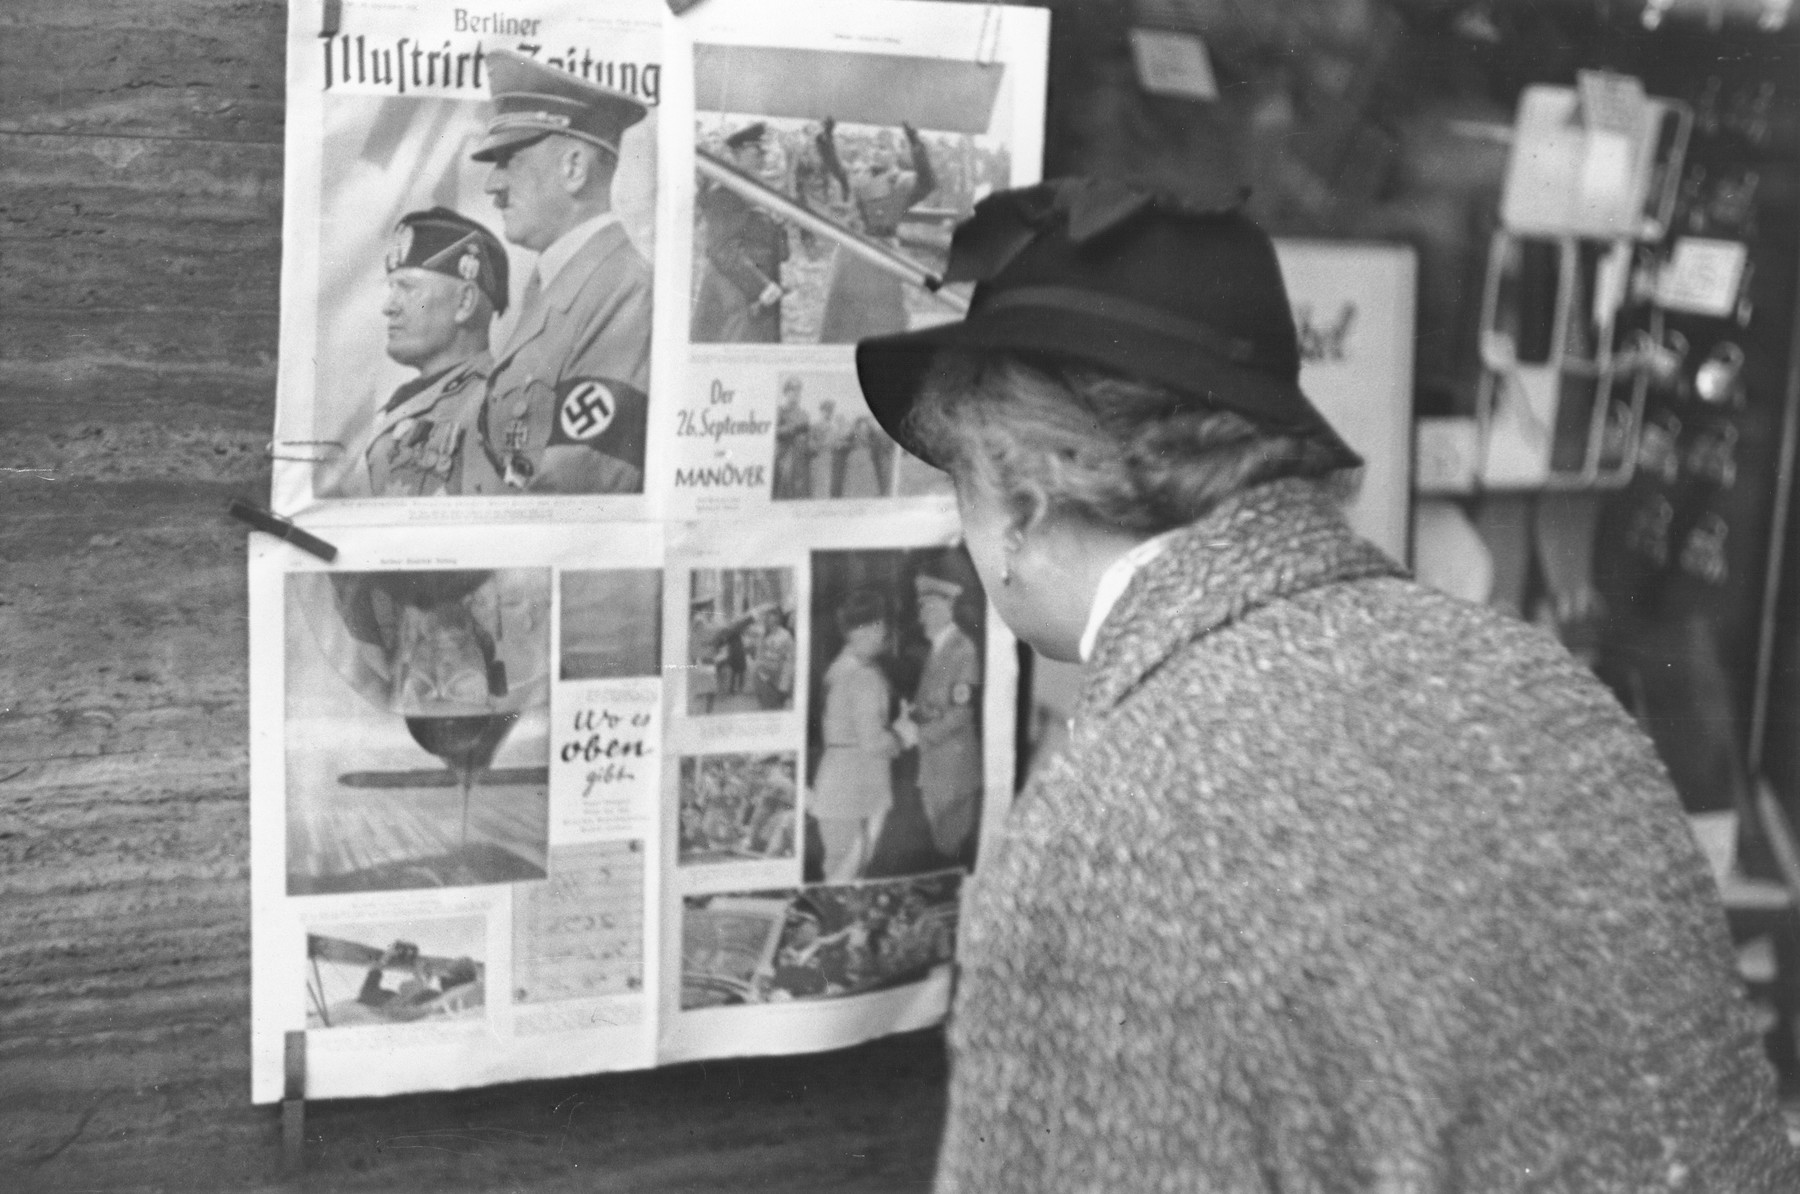 A German woman reads a copy of the Berliner Illustrierte newspaper that has been posted on a wall in Berlin.  It features photographs of Mussolini's official visit to Berlin in September 1937.